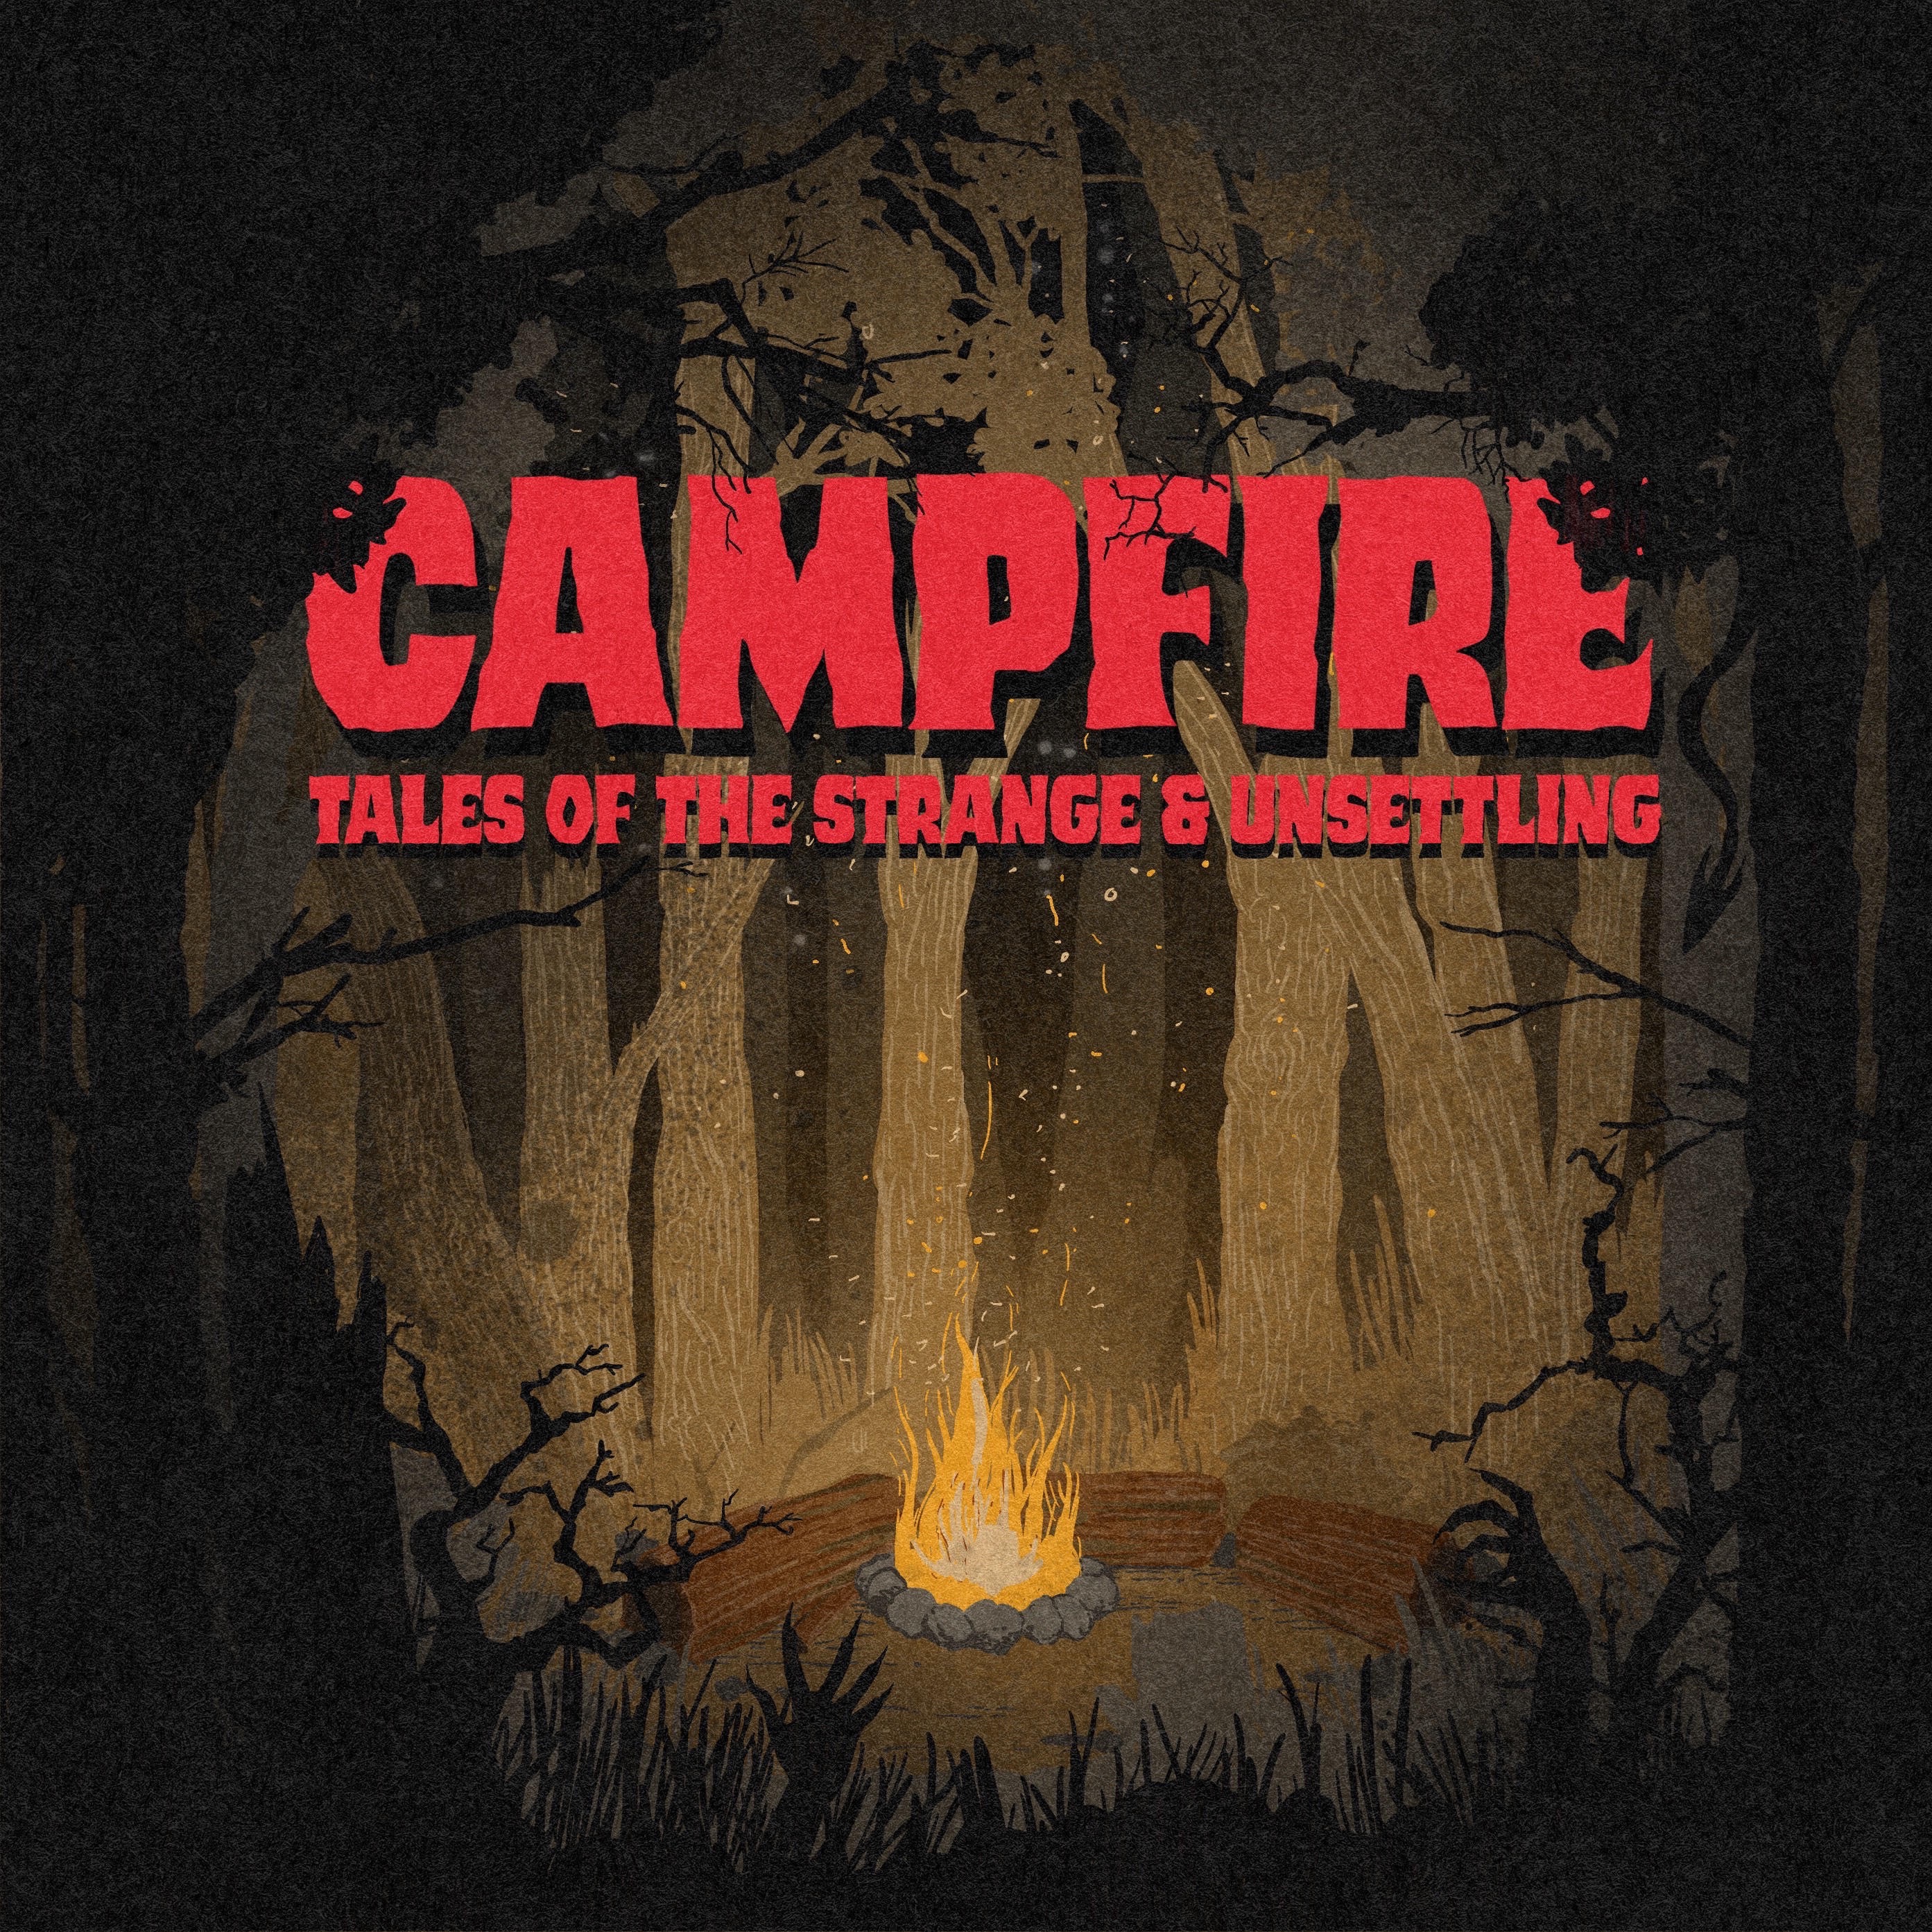 Campfire Classics Collection Volume 12: The Masque of the Red Death